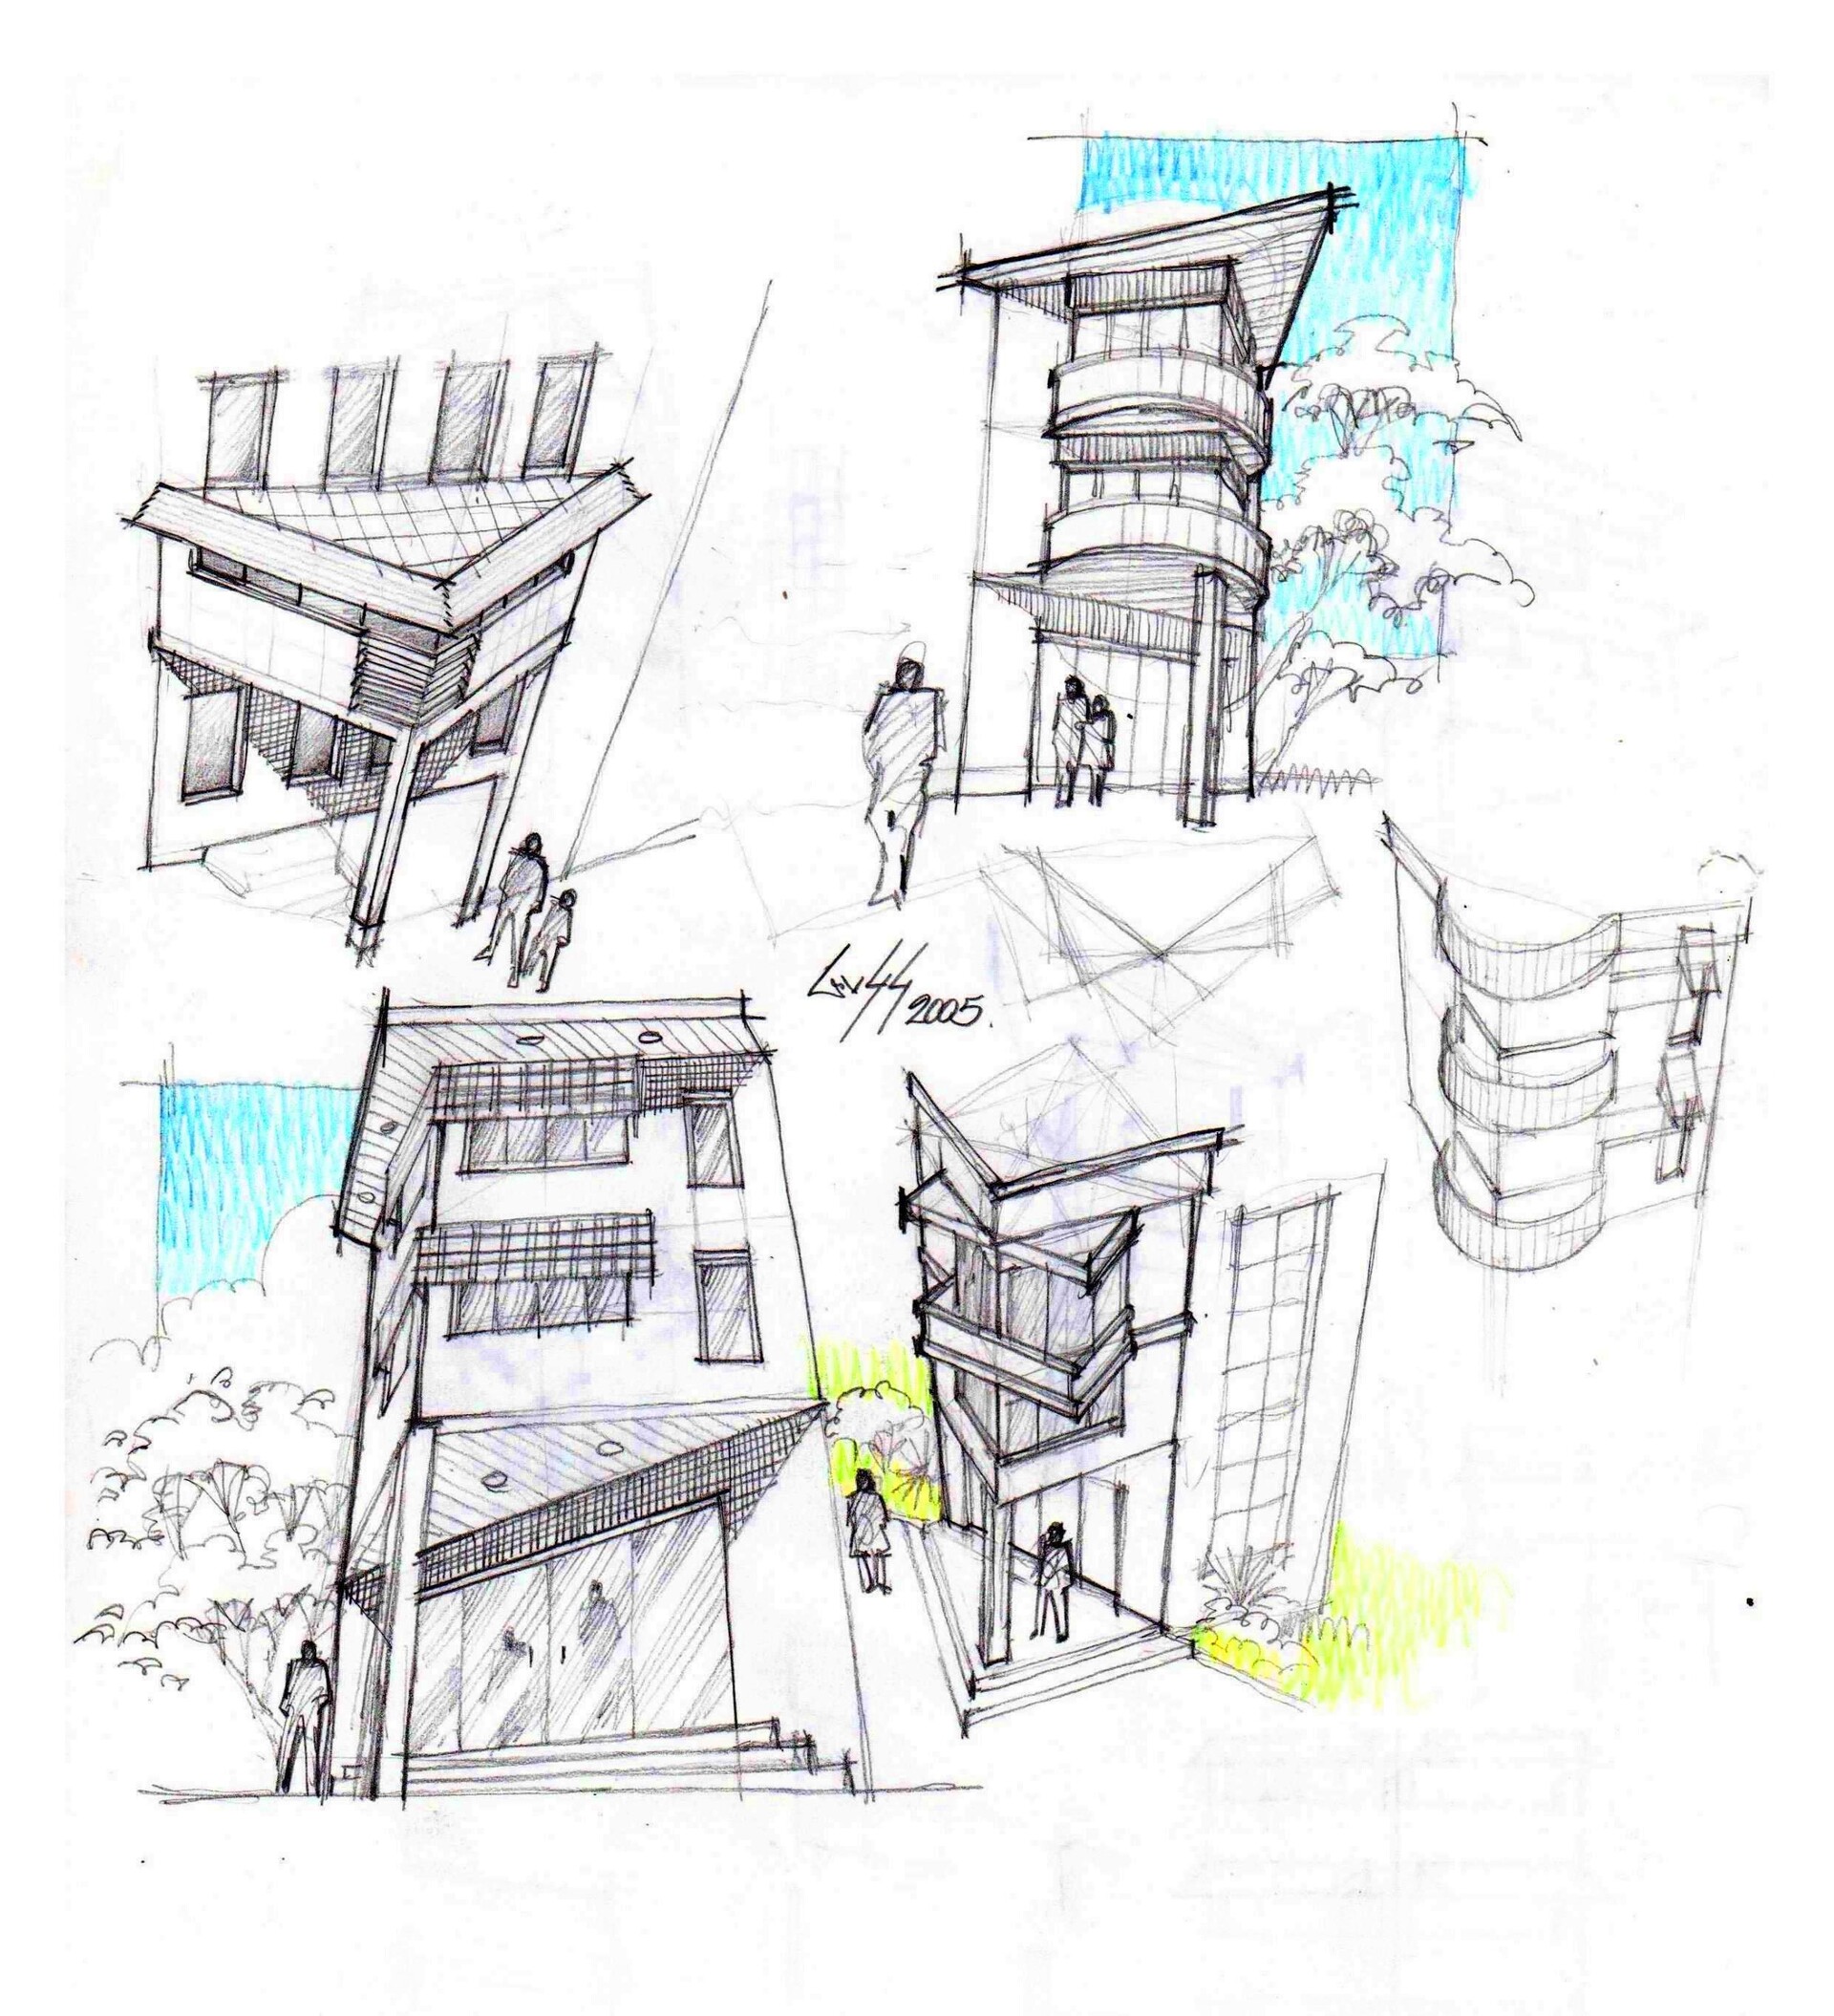 esquisse #sketch #drawing #architecture #manual #rendering  Architecture  drawing presentation, Architecture design process, Architecture portfolio  design